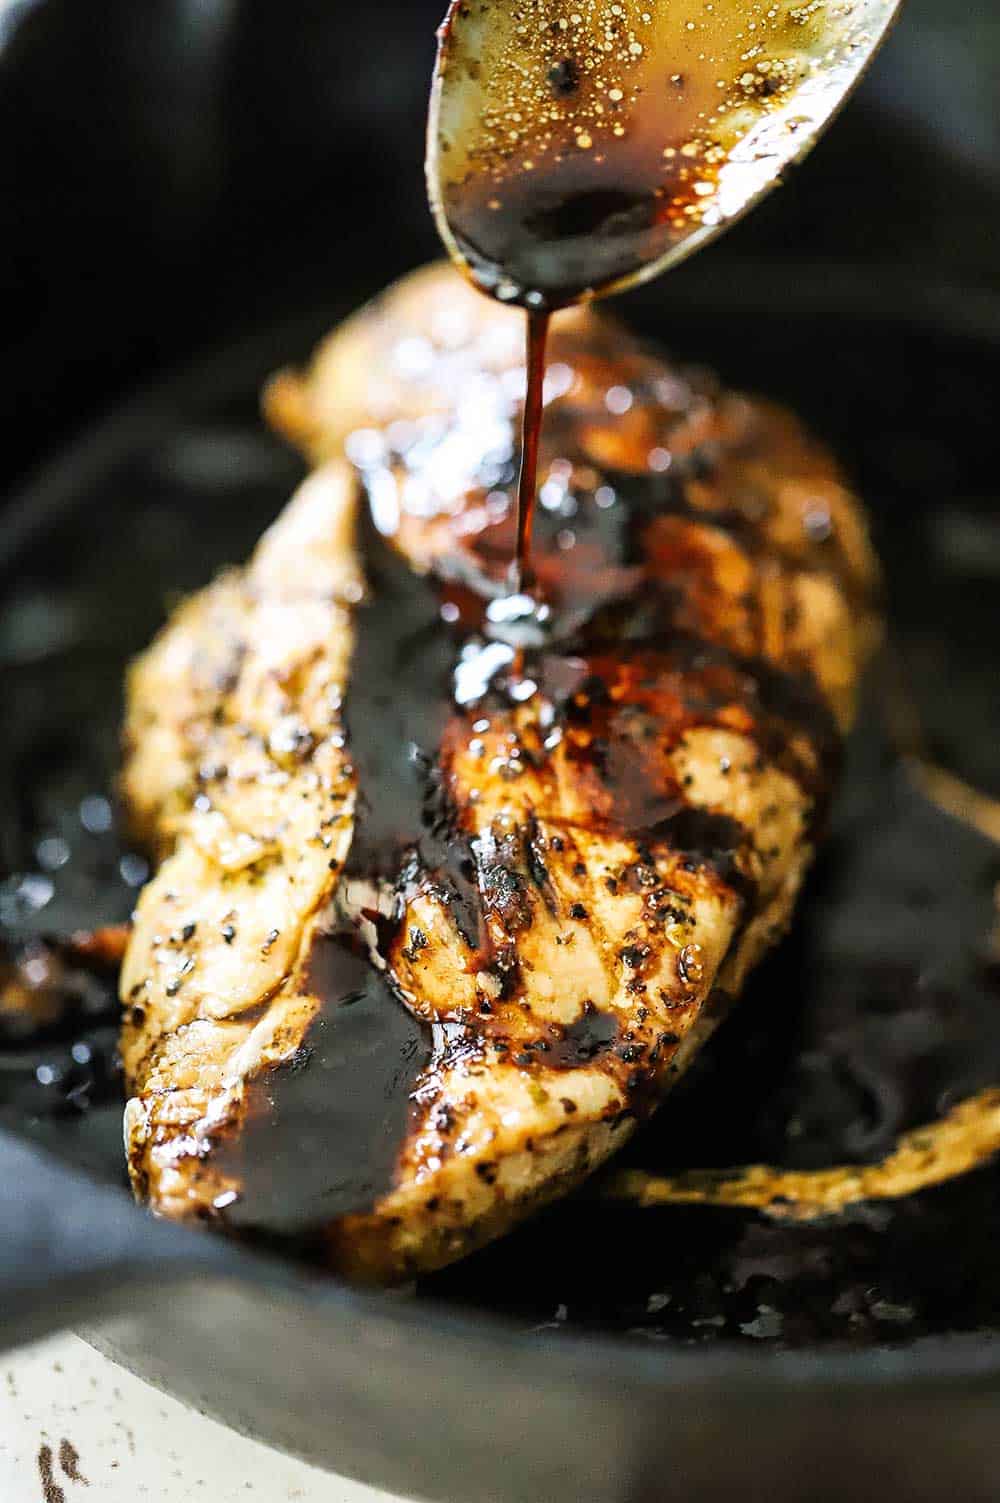 A large spoon drizzling a balsamic glaze over a seared chicken breast in a cast-iron skillet